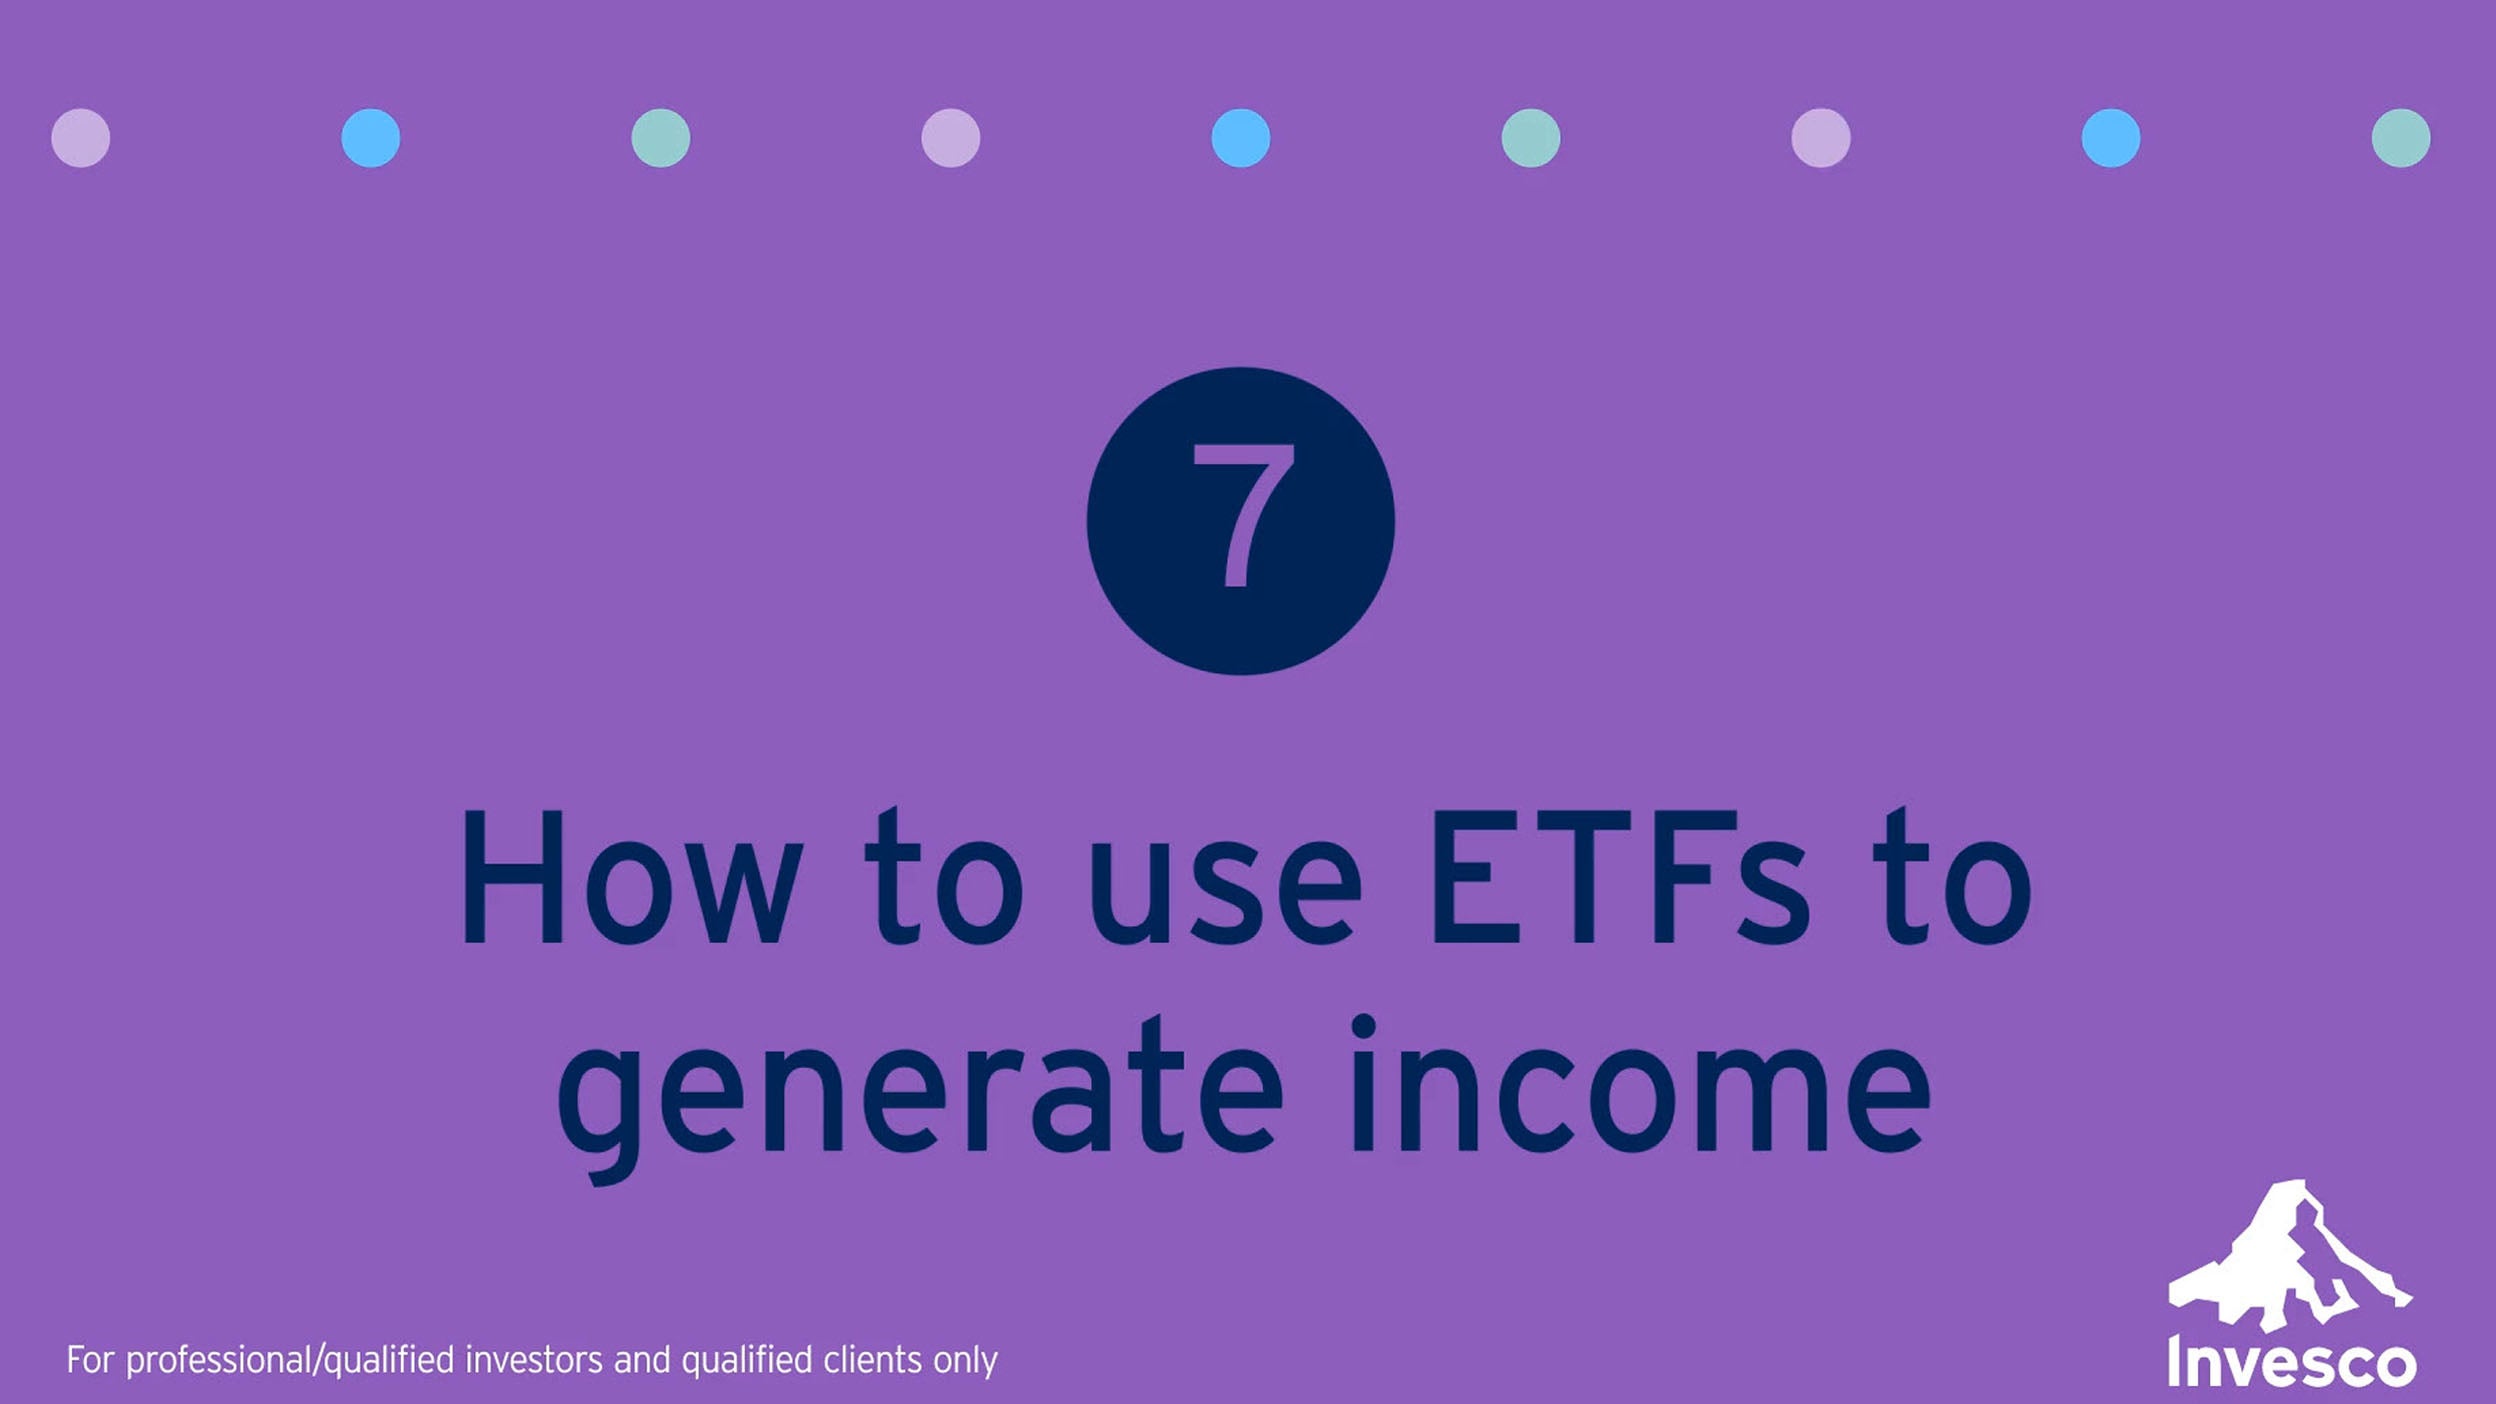 How to use ETFs to generate income